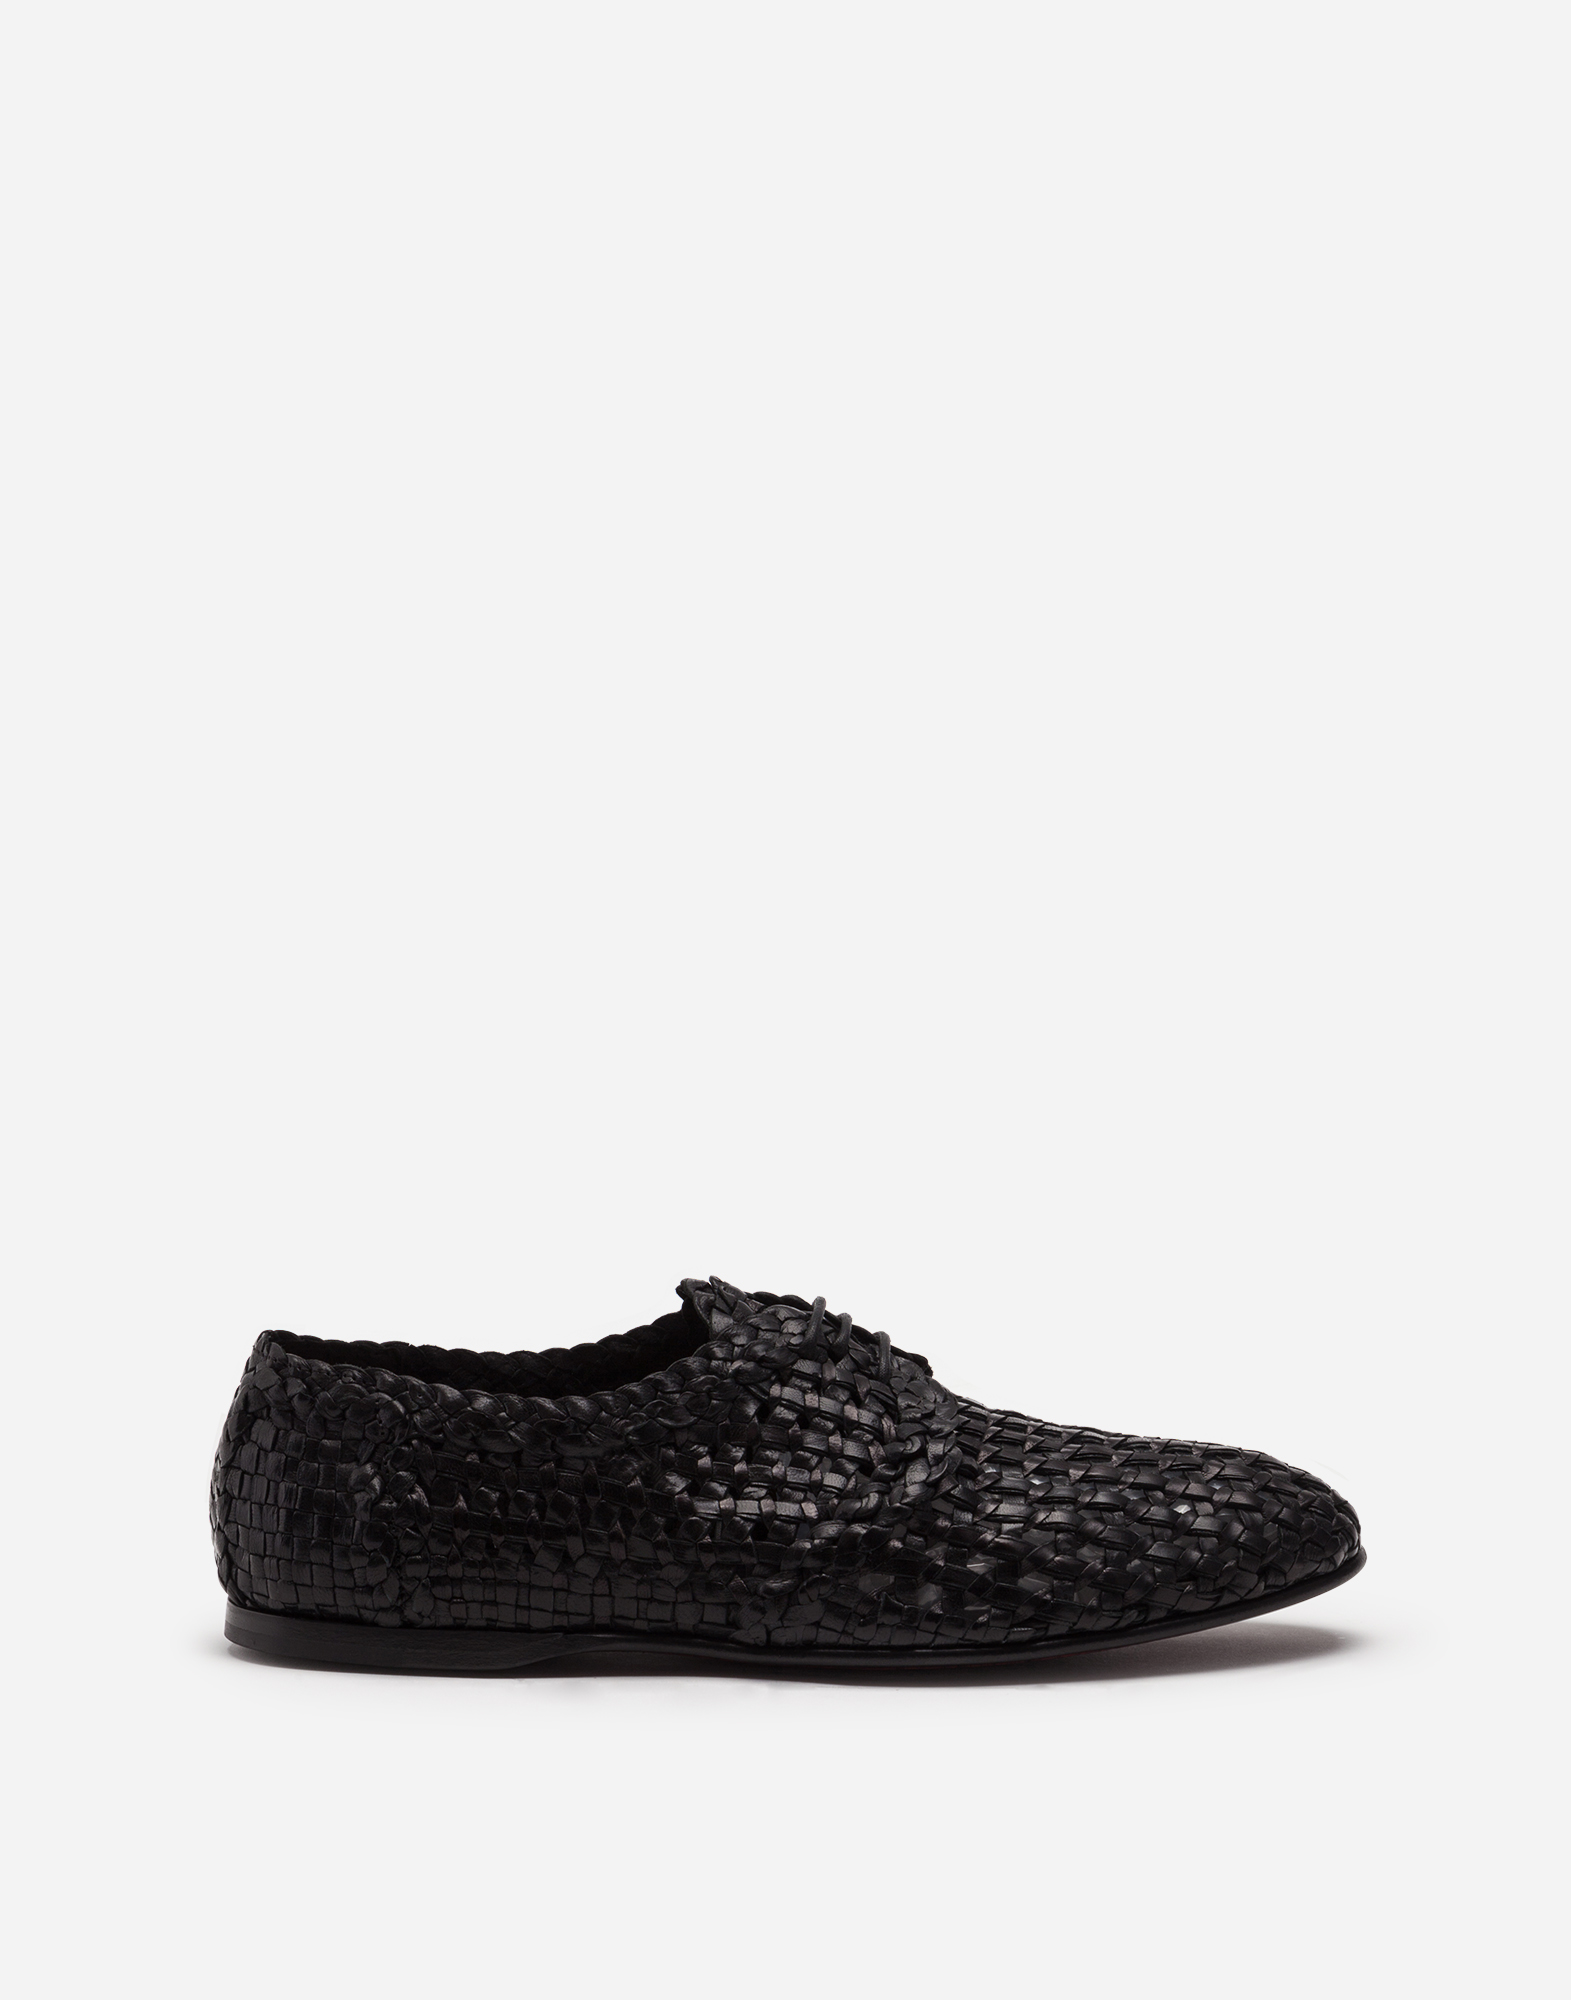 DOLCE & GABBANA PERSIA WOVEN LEATHER DERBY SHOES